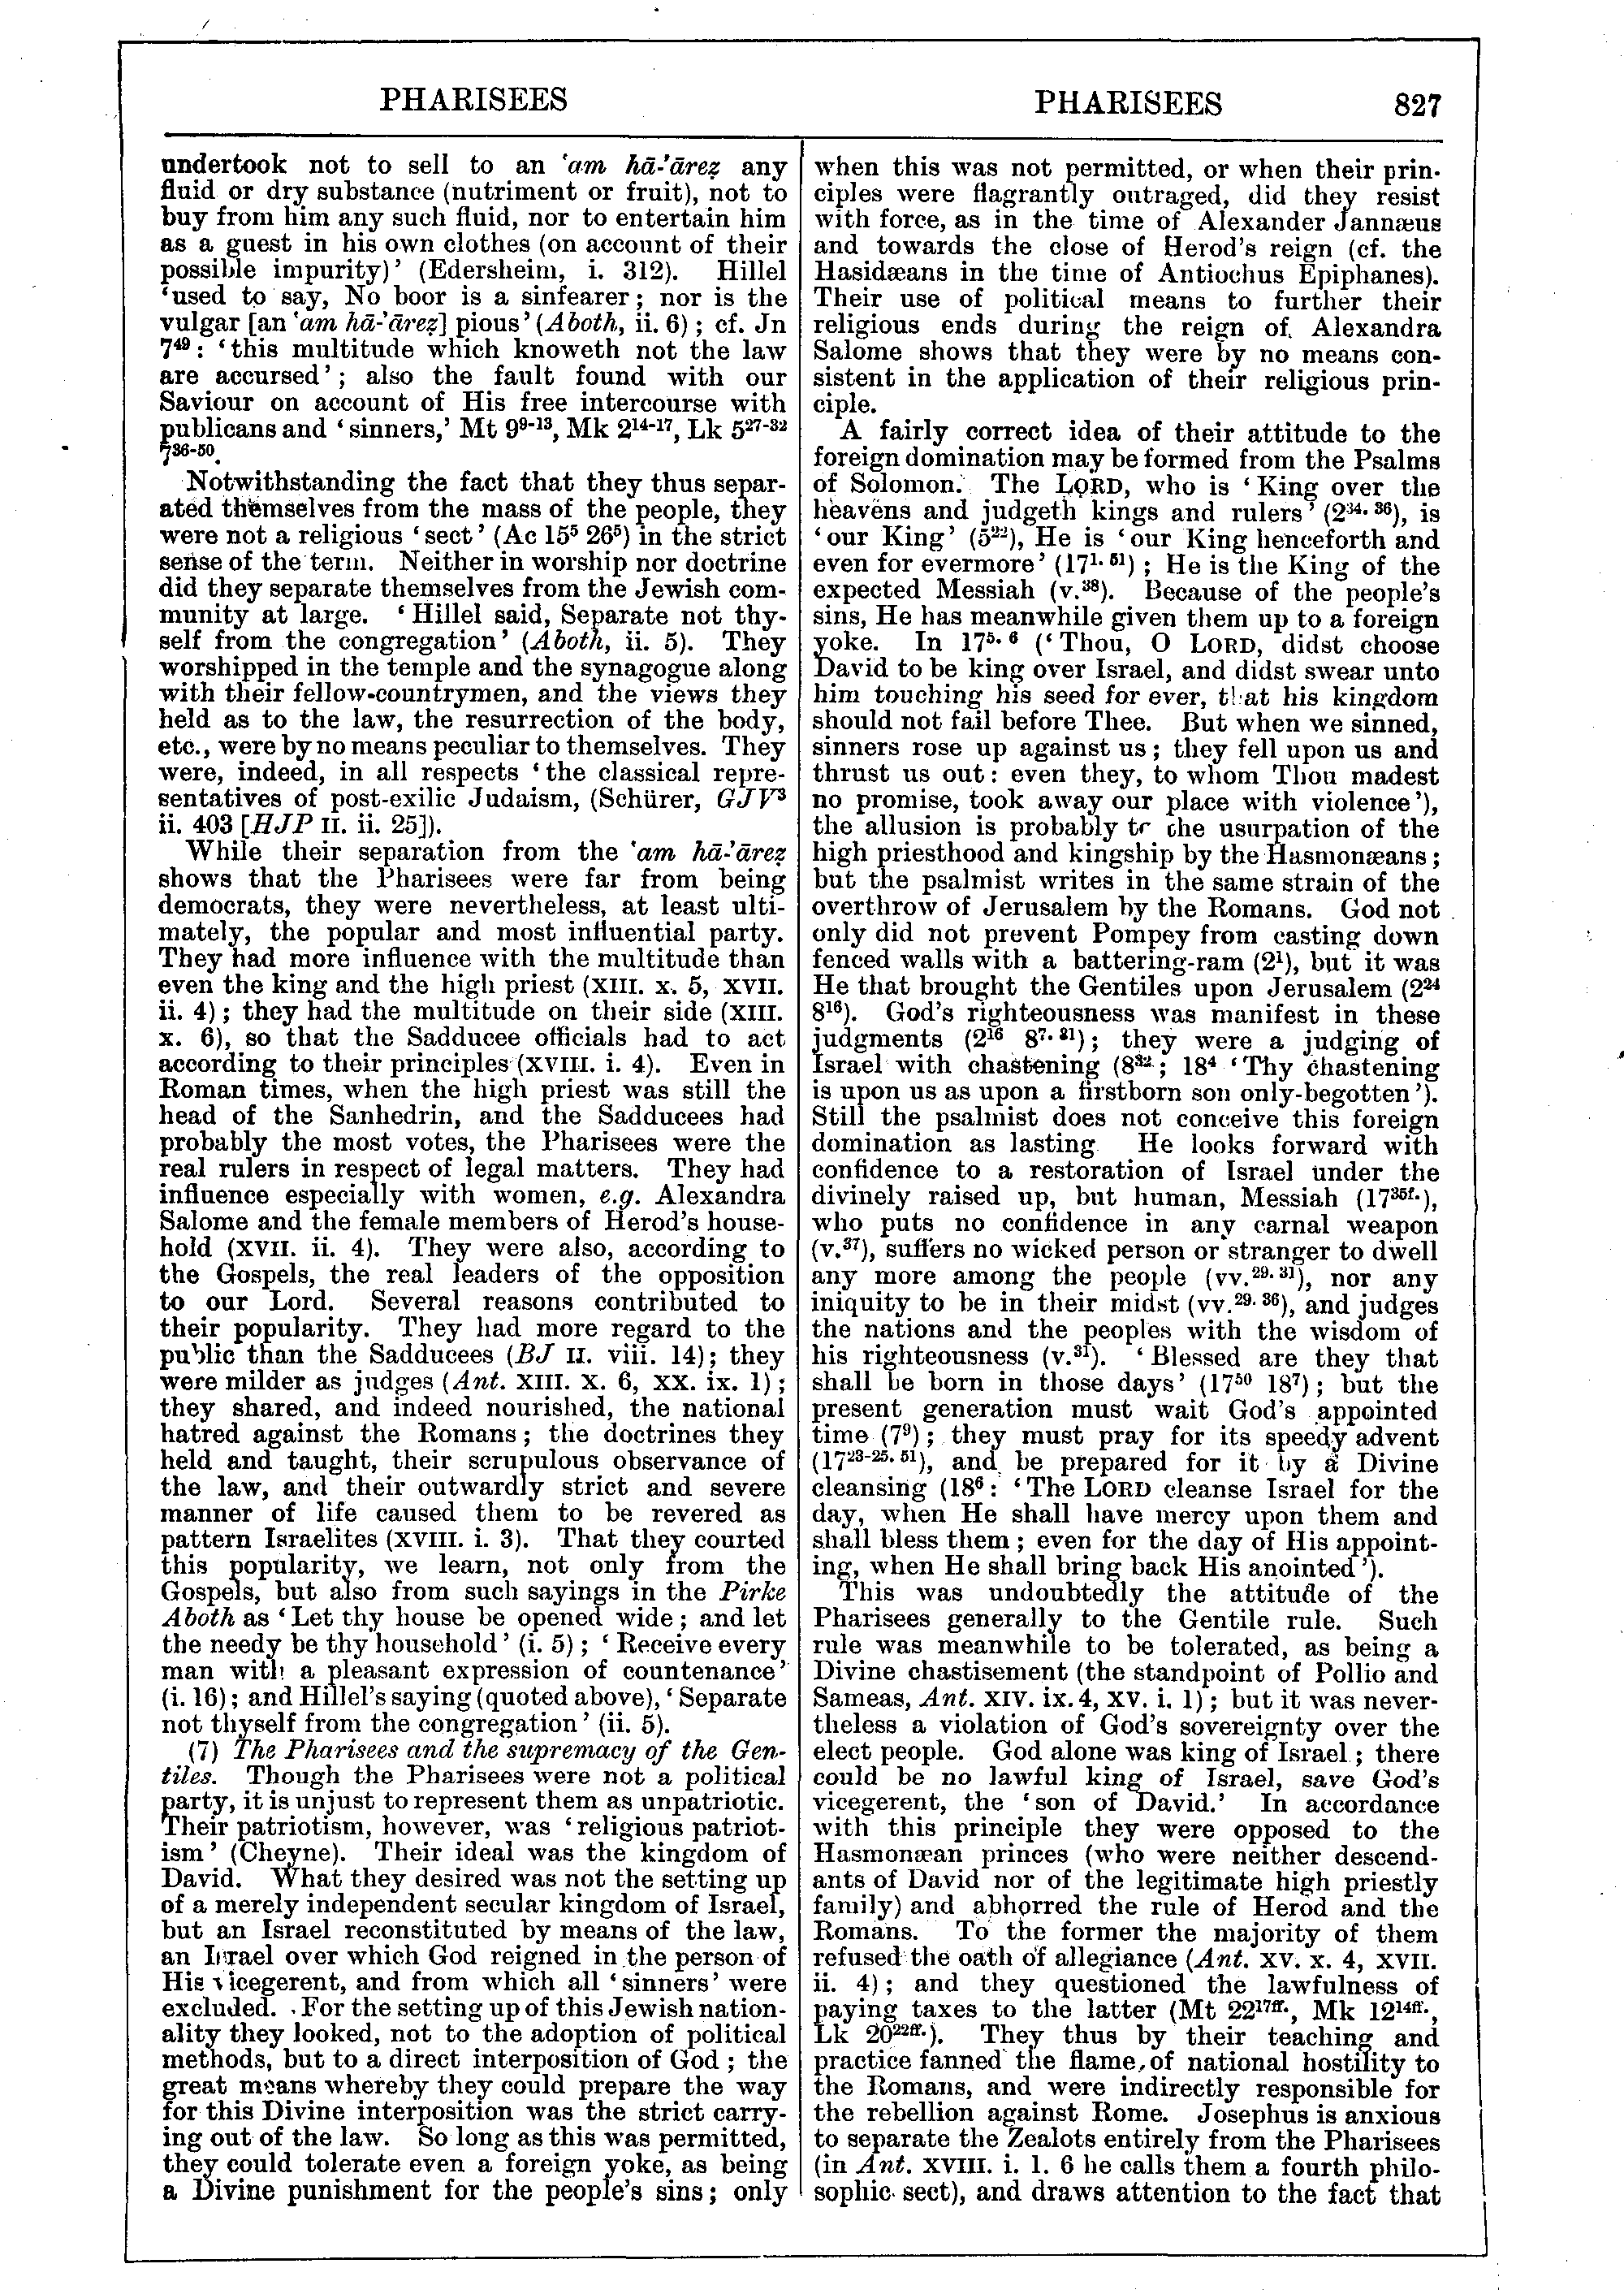 Image of page 827